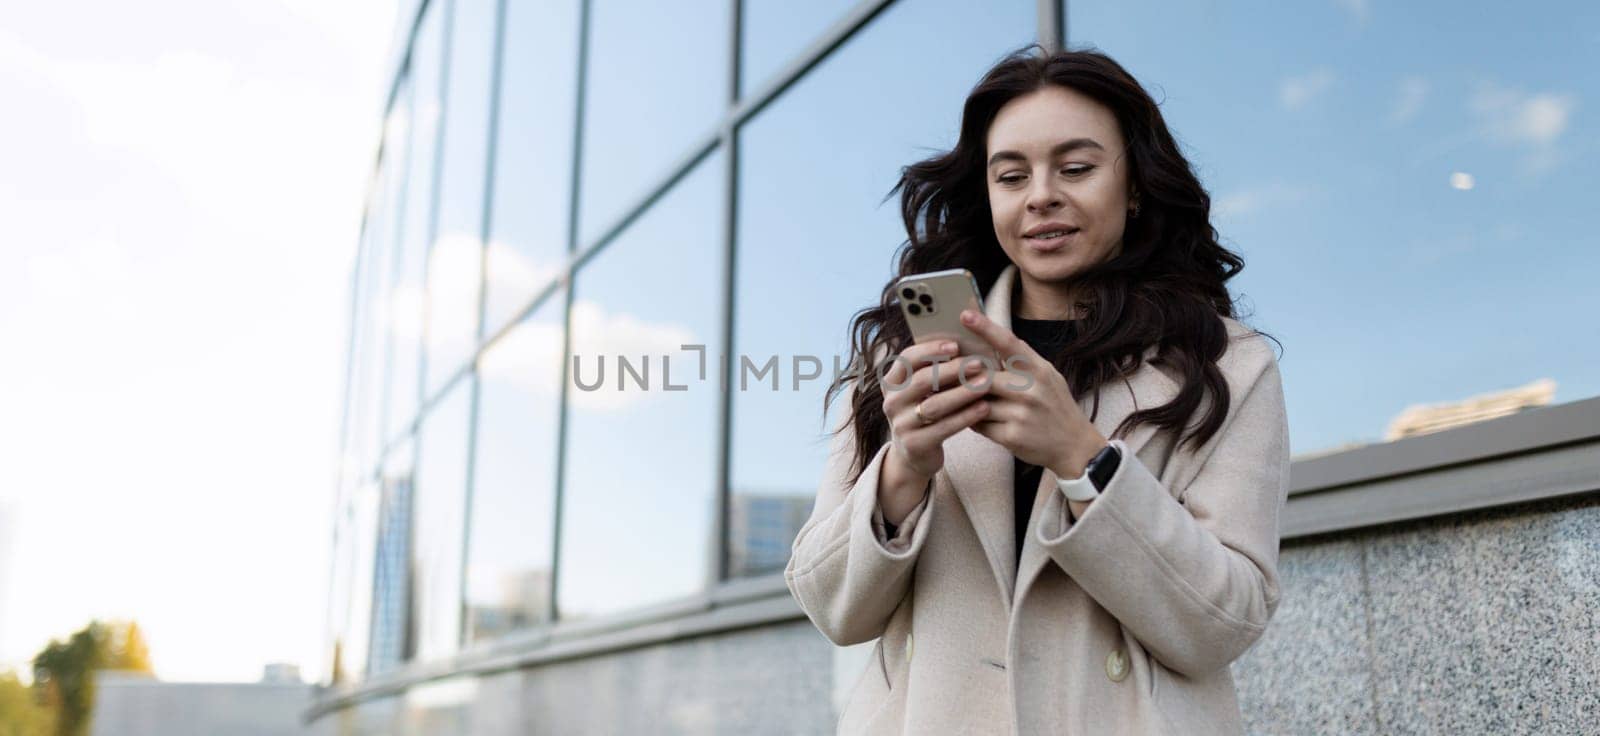 A business woman in her 30s looks at a smartphone screen against the background of a glass facade of a business center.